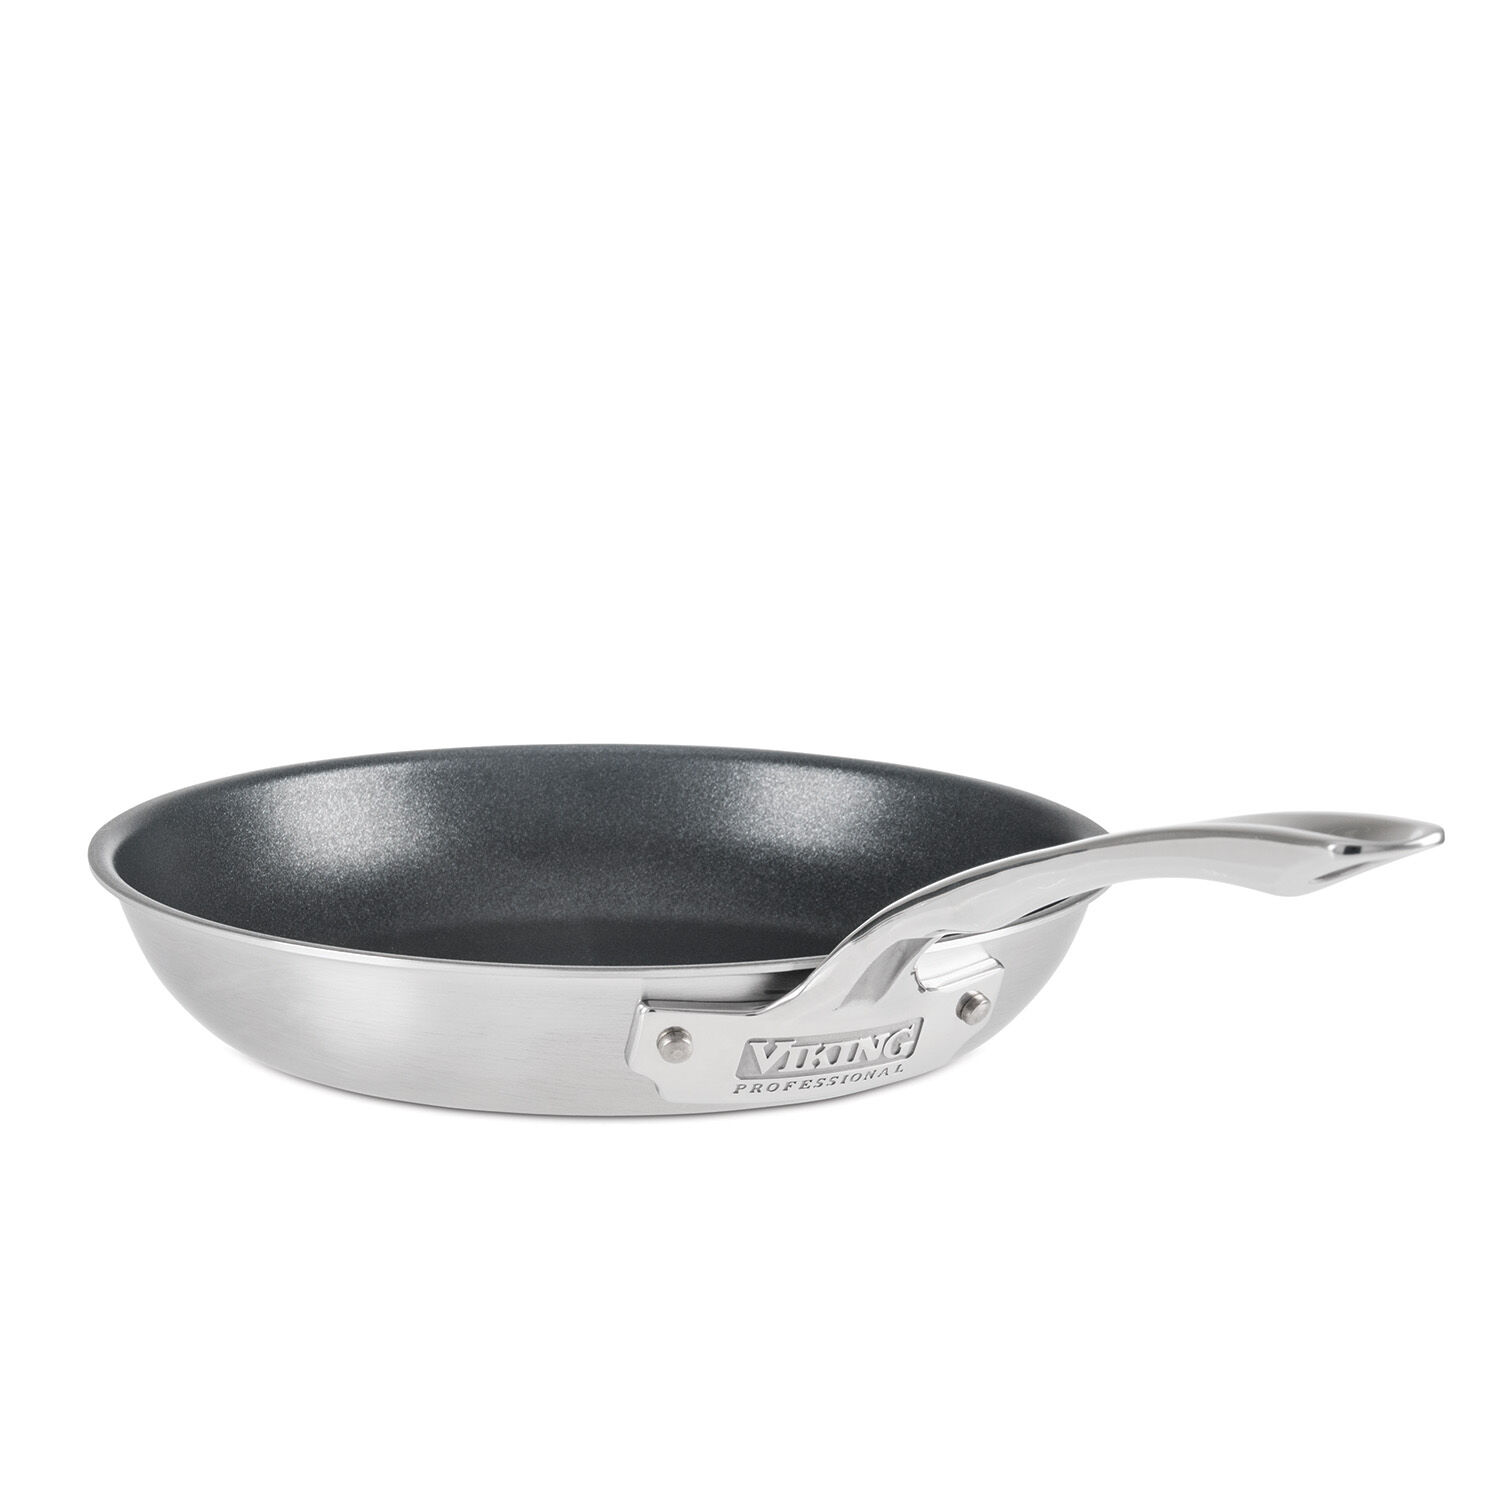 Viking Professional 5-Ply Stainless Steel Nonstick Fry Pan 10 Inch with Lid Viking Stainless Steel Frying Pan